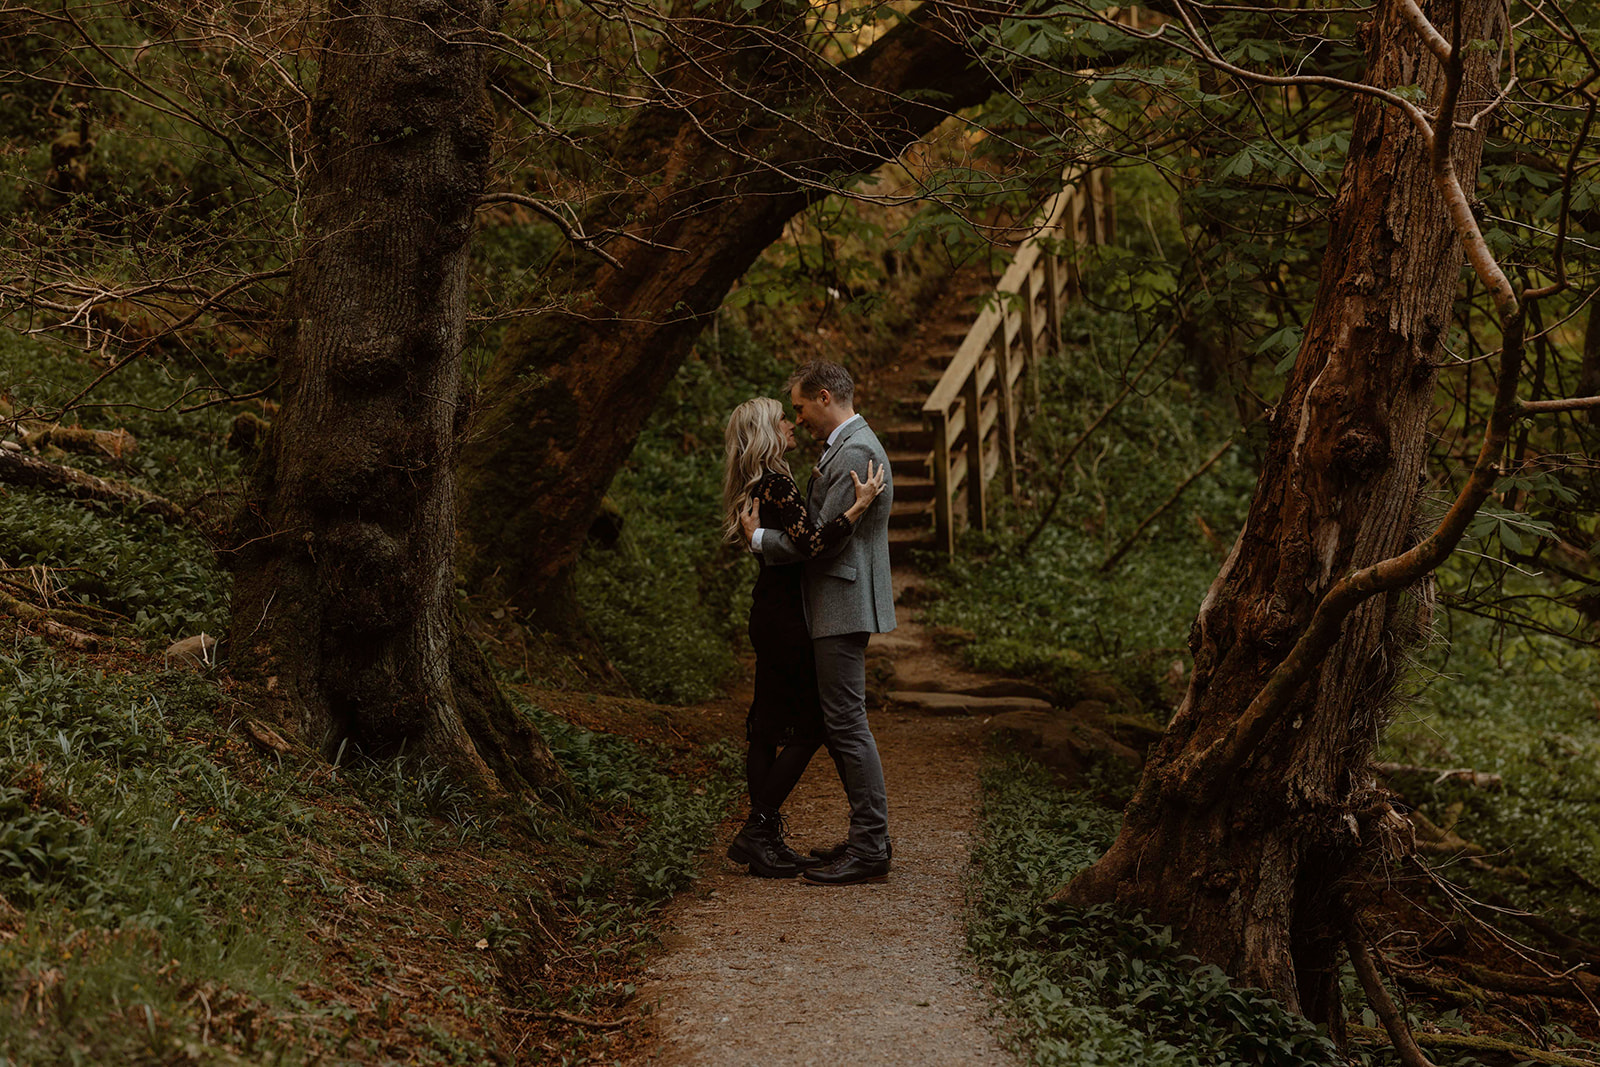 Kara and Andy shared an intimate moment during their Isle of Skye elopement